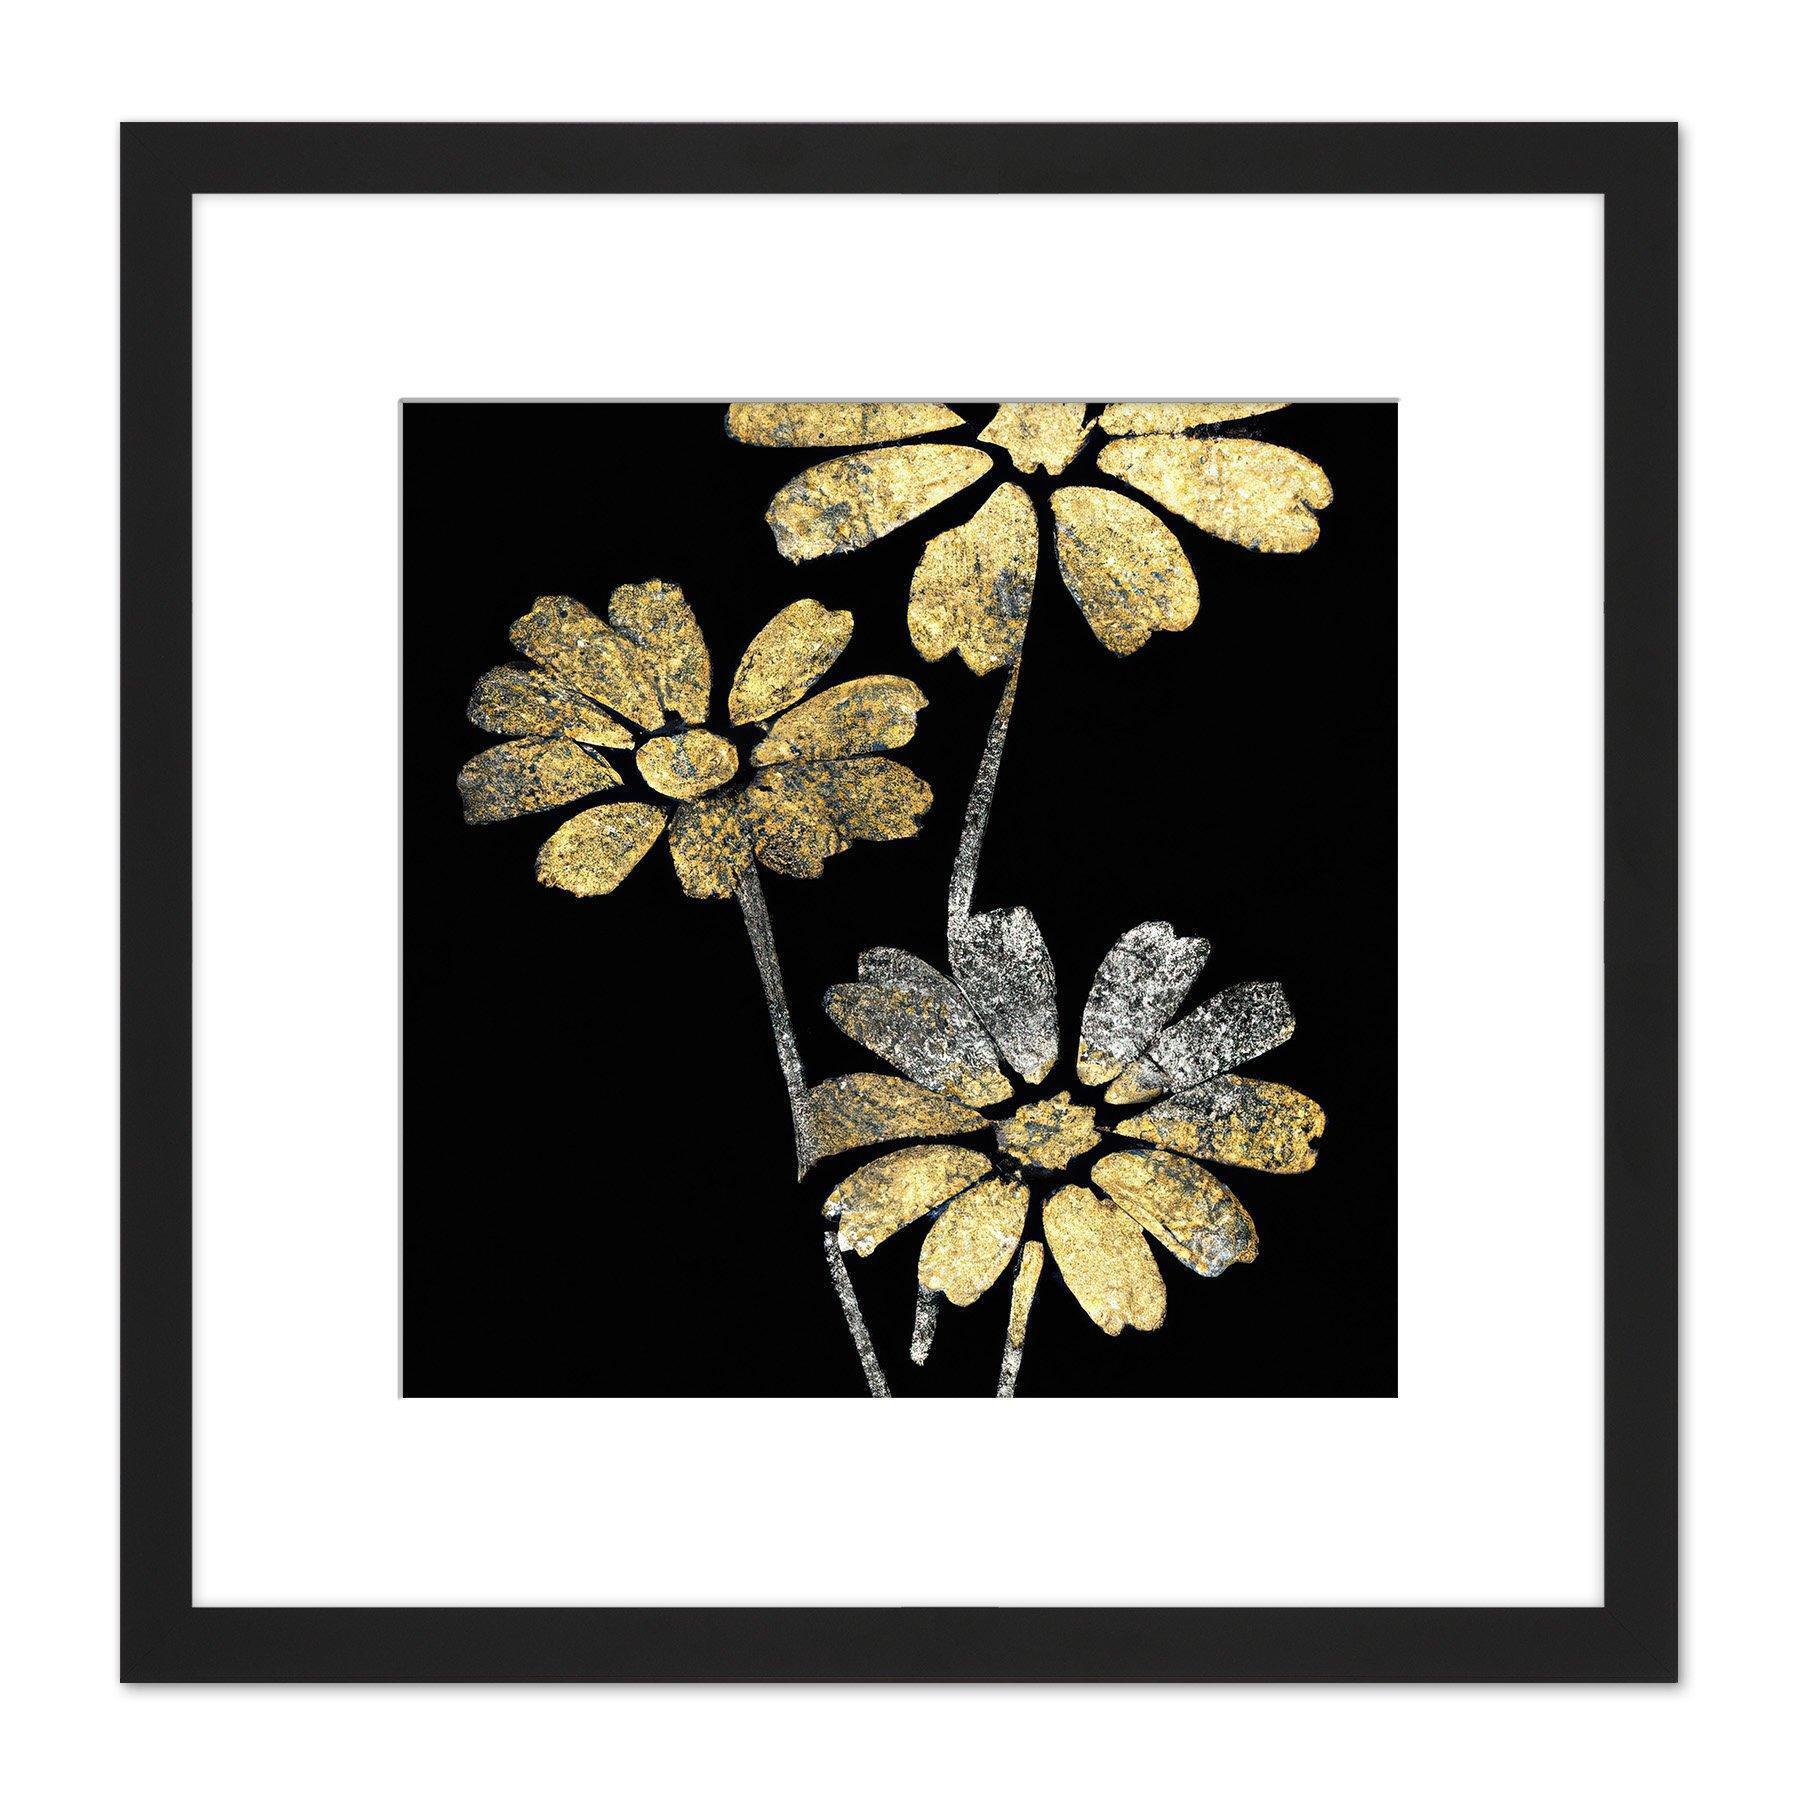 Gold Silver Leaf Style Flowers Floral Metallic Effect Foil Style Black Painting Square Wooden Framed Wall Art Print Picture 8X8 Inch - image 1